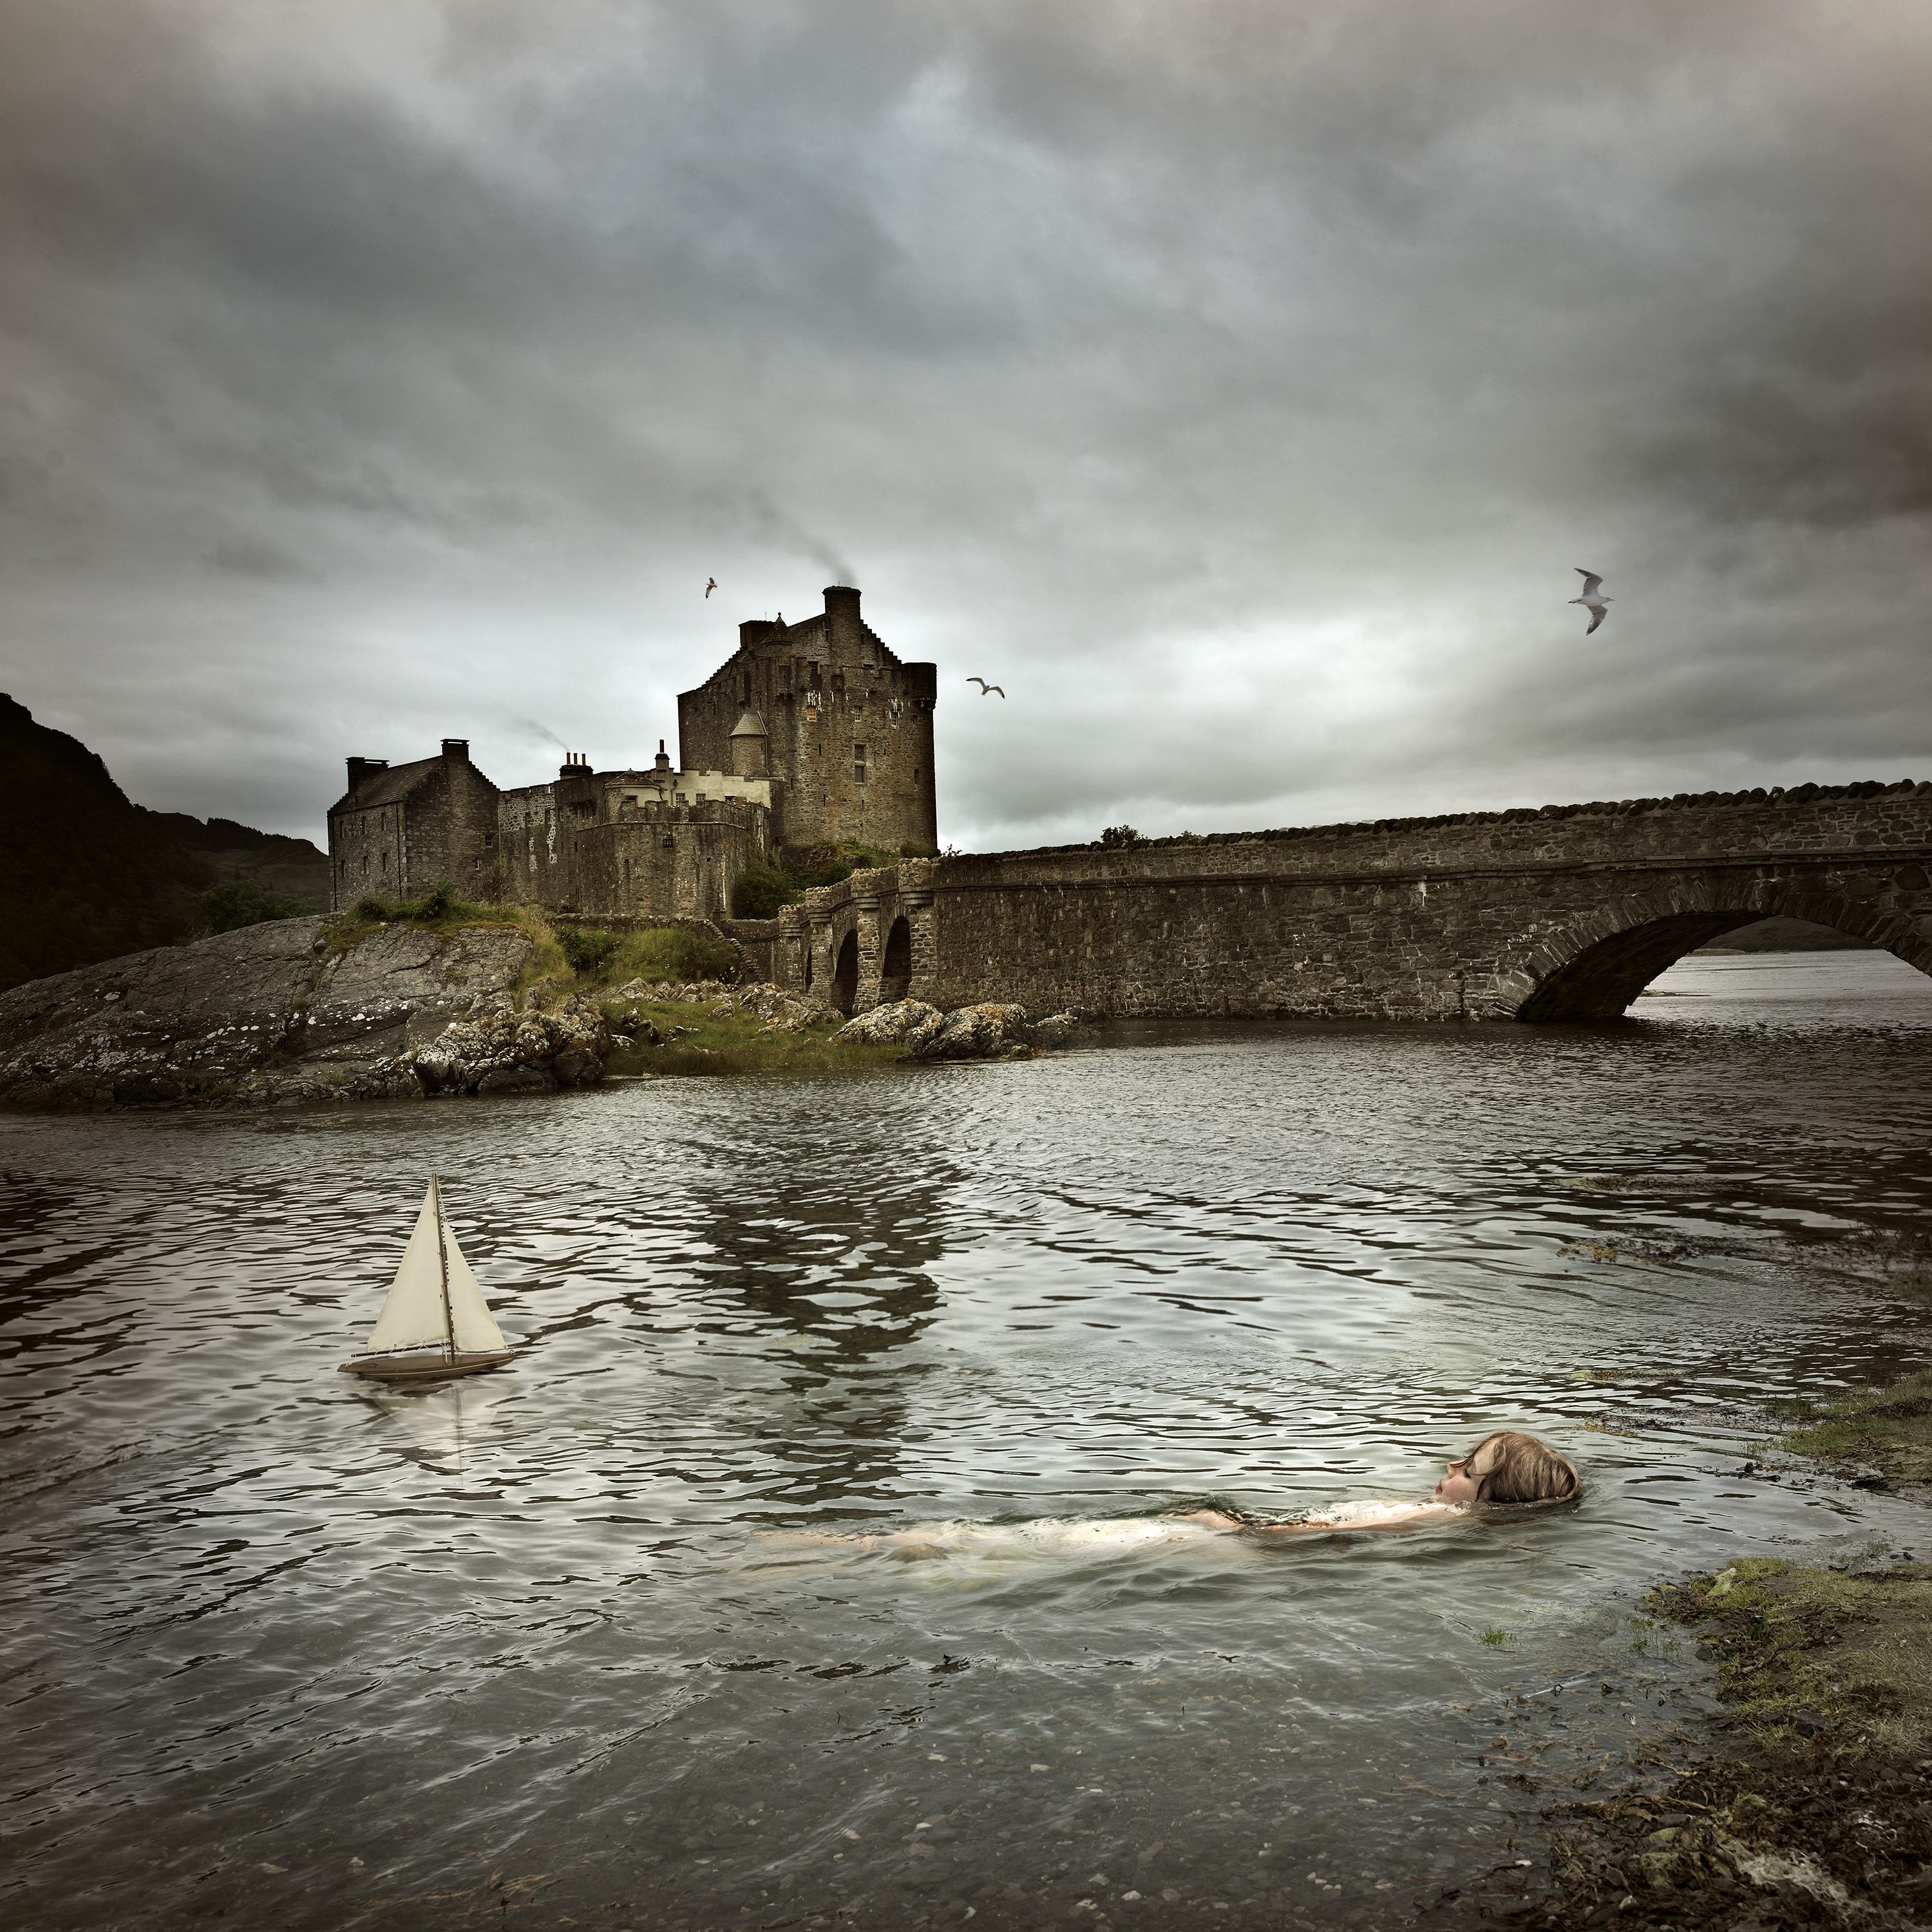 Moat Float - Photograph by Tom Chambers